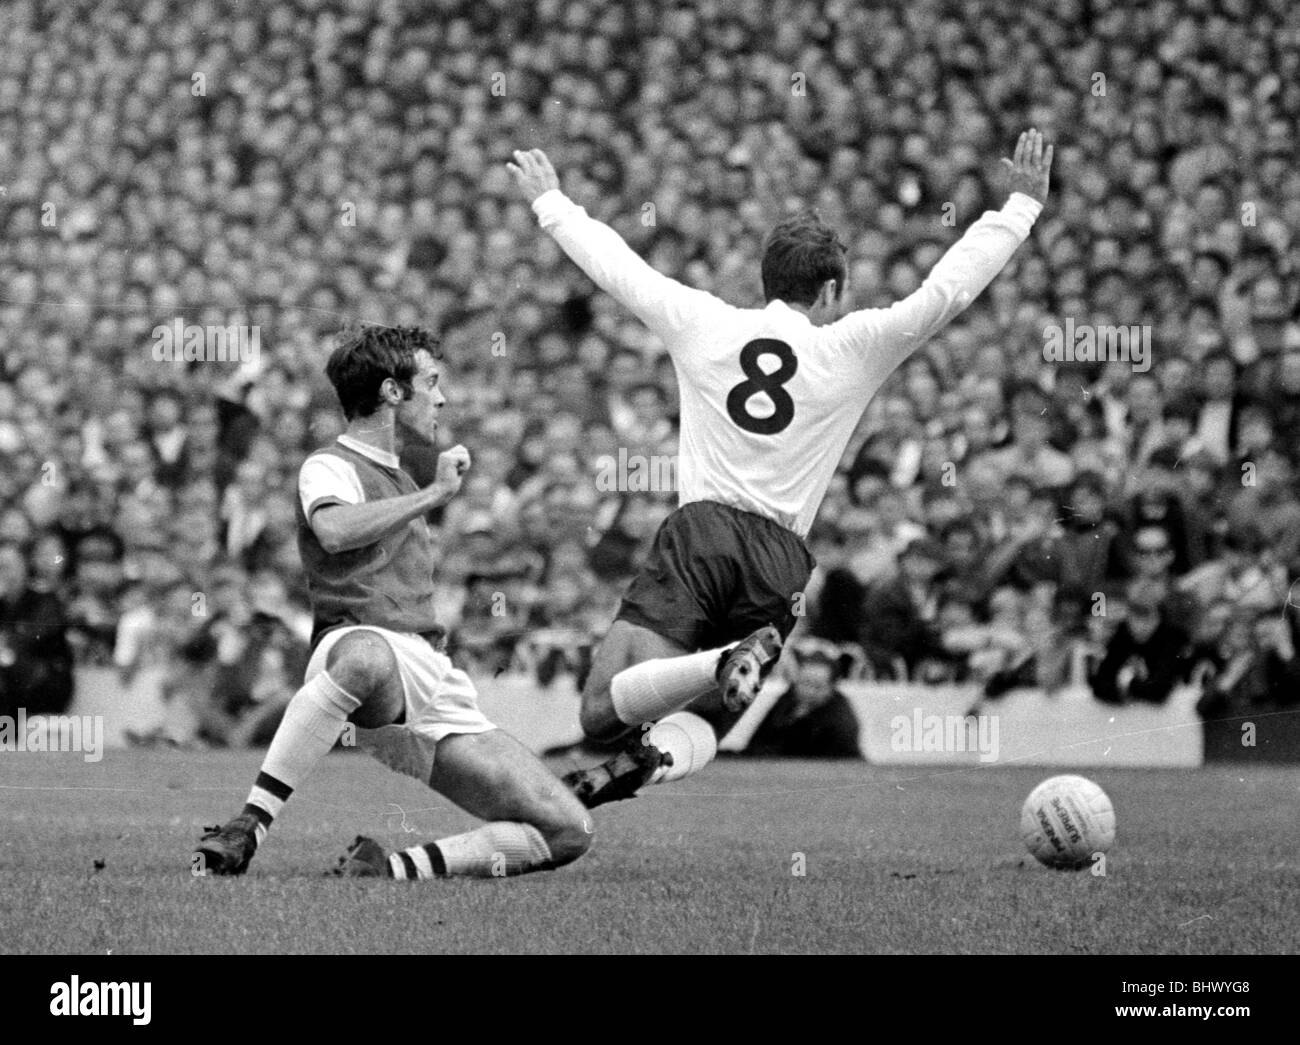 English league division One match August 1968 Tottenham Hotspur 1 v Arsenal 2 at White Hart Lane Action during the match Stock Photo